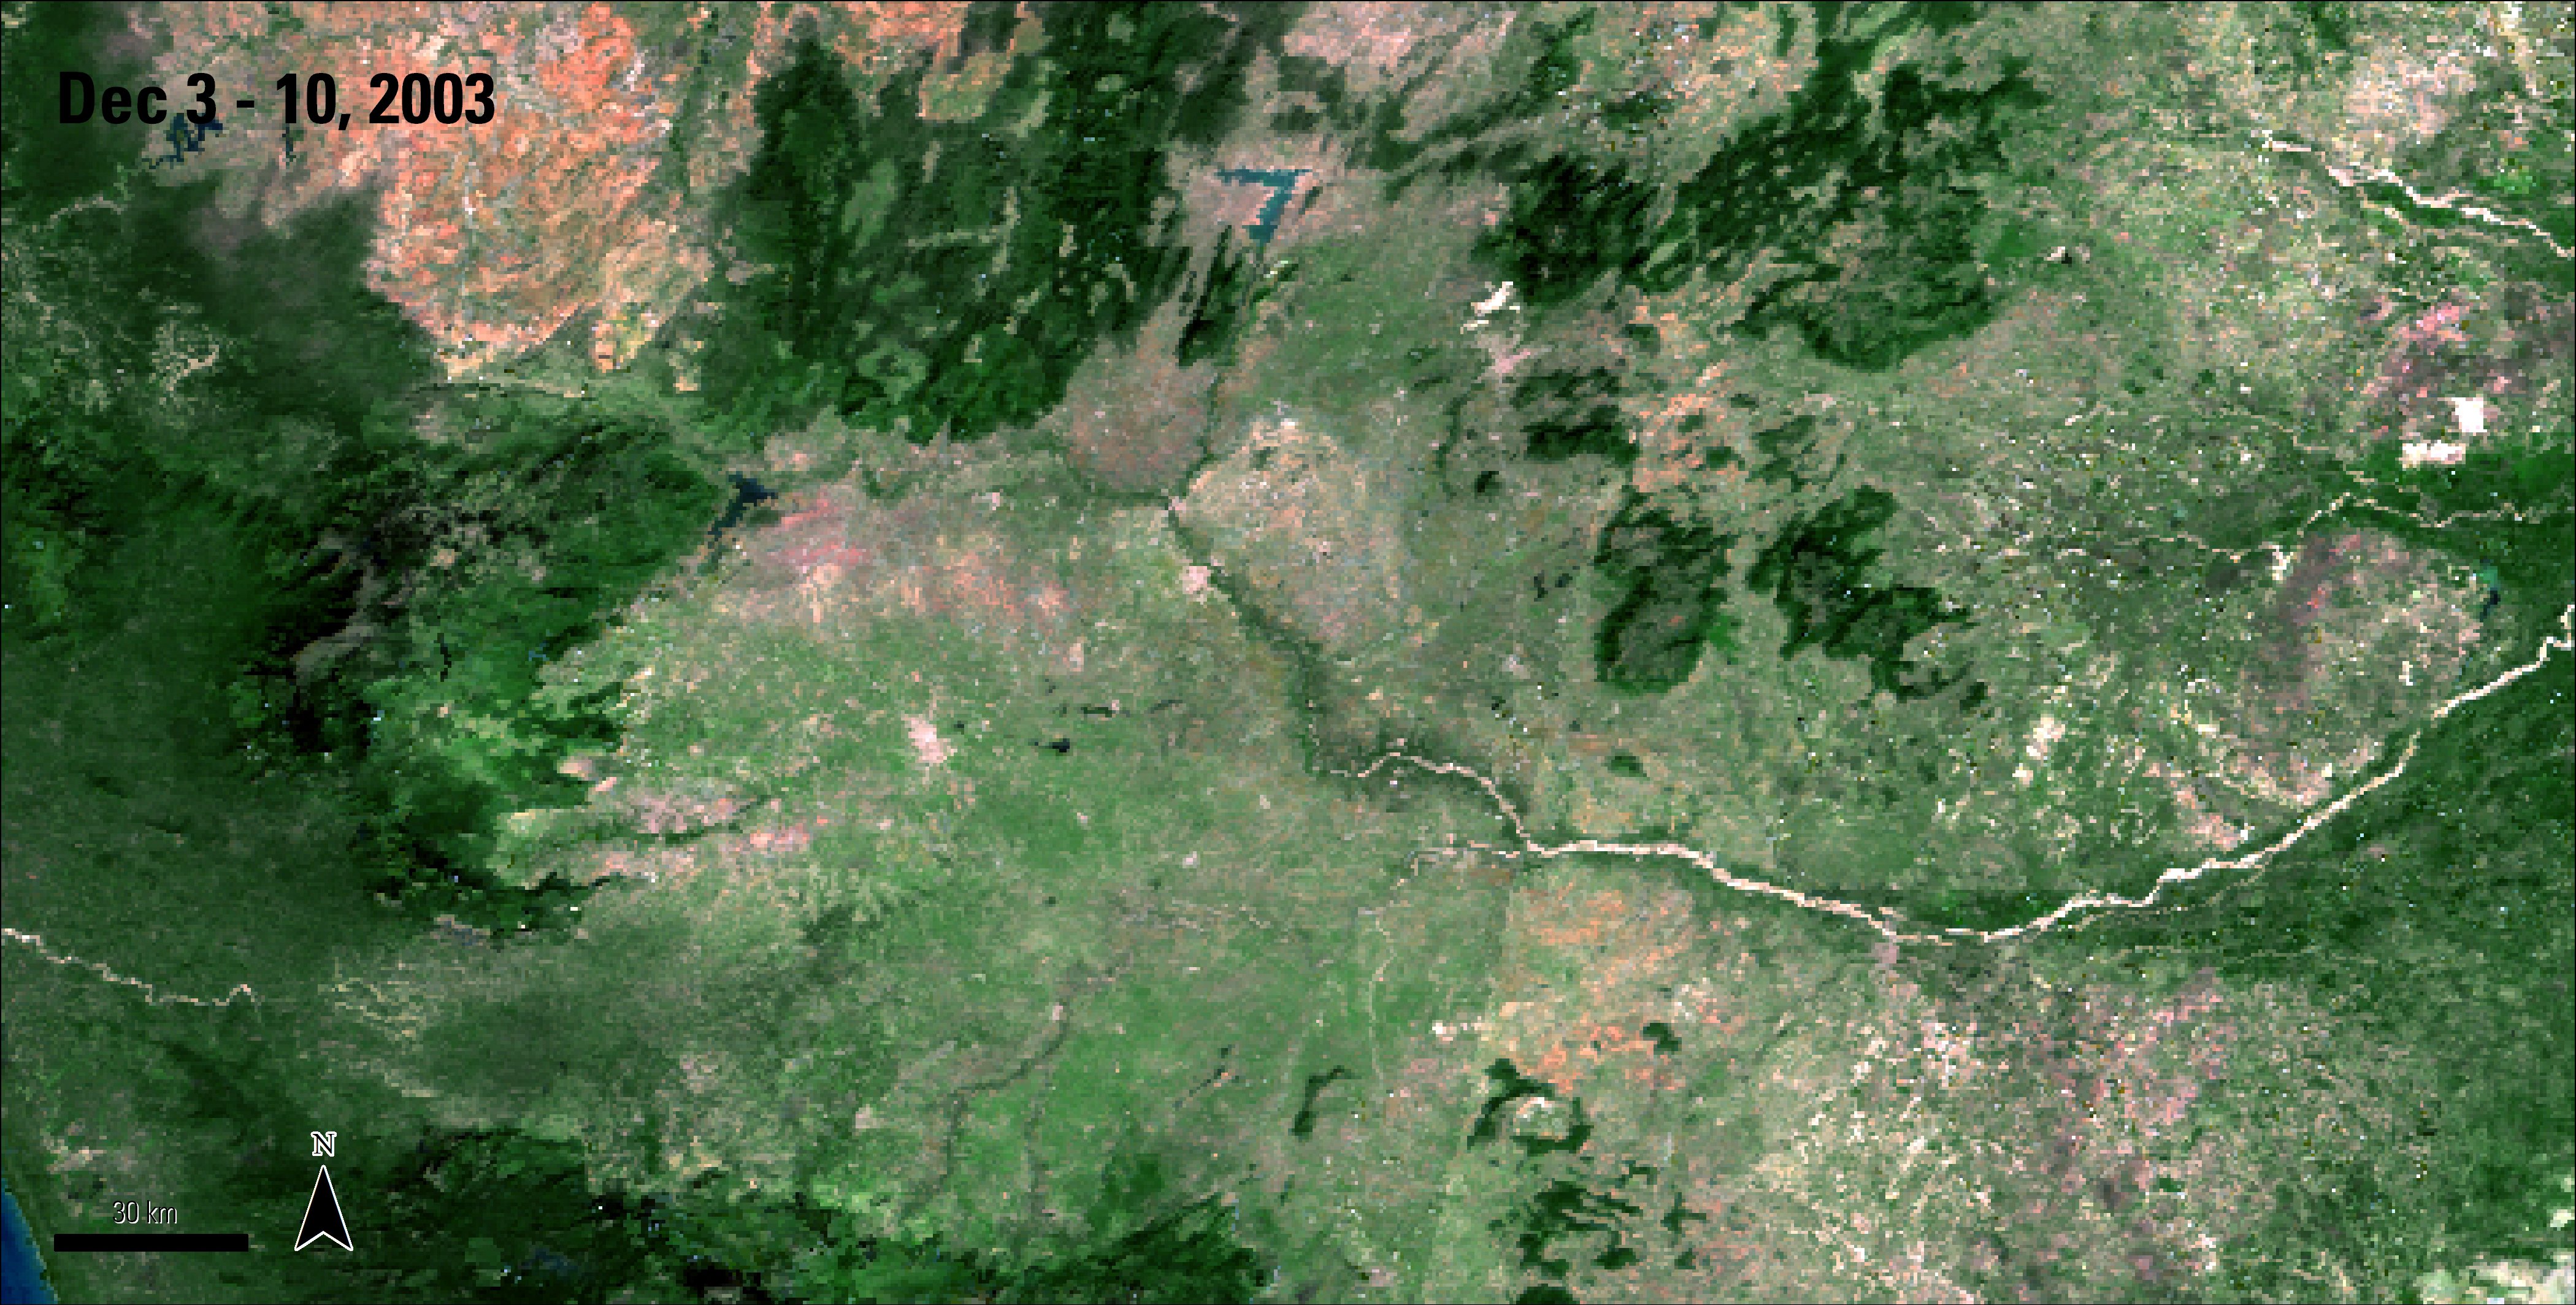 A Terra MODIS Surface Reflectance of Tamil Nadu, India, acquired between December 3 and 10, 2003.